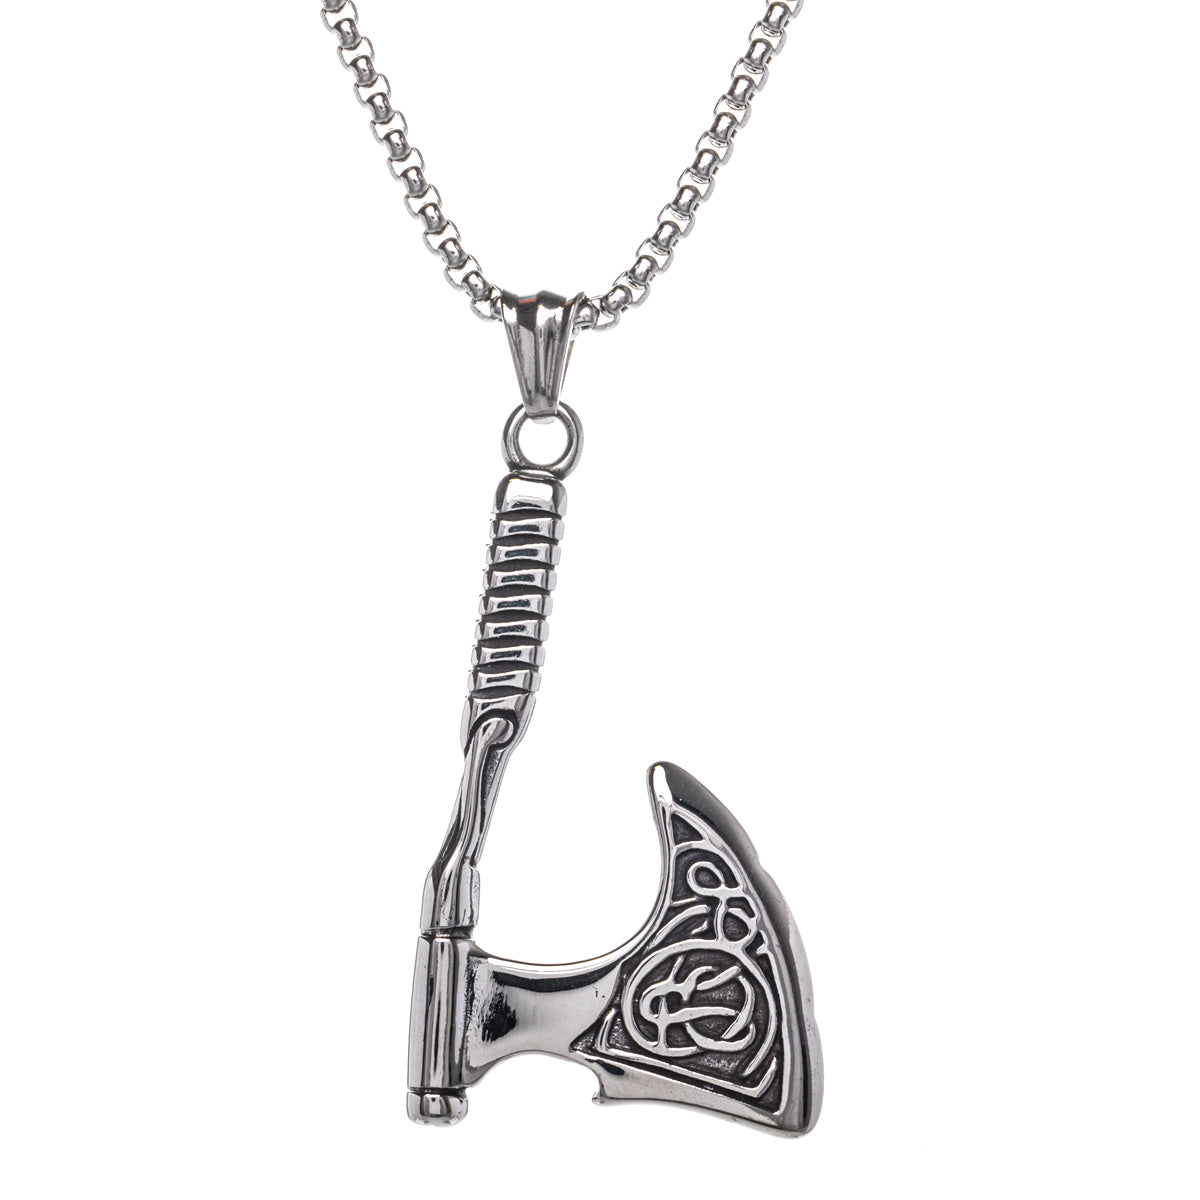 Engraved Viking axe necklace (Steel 316L)